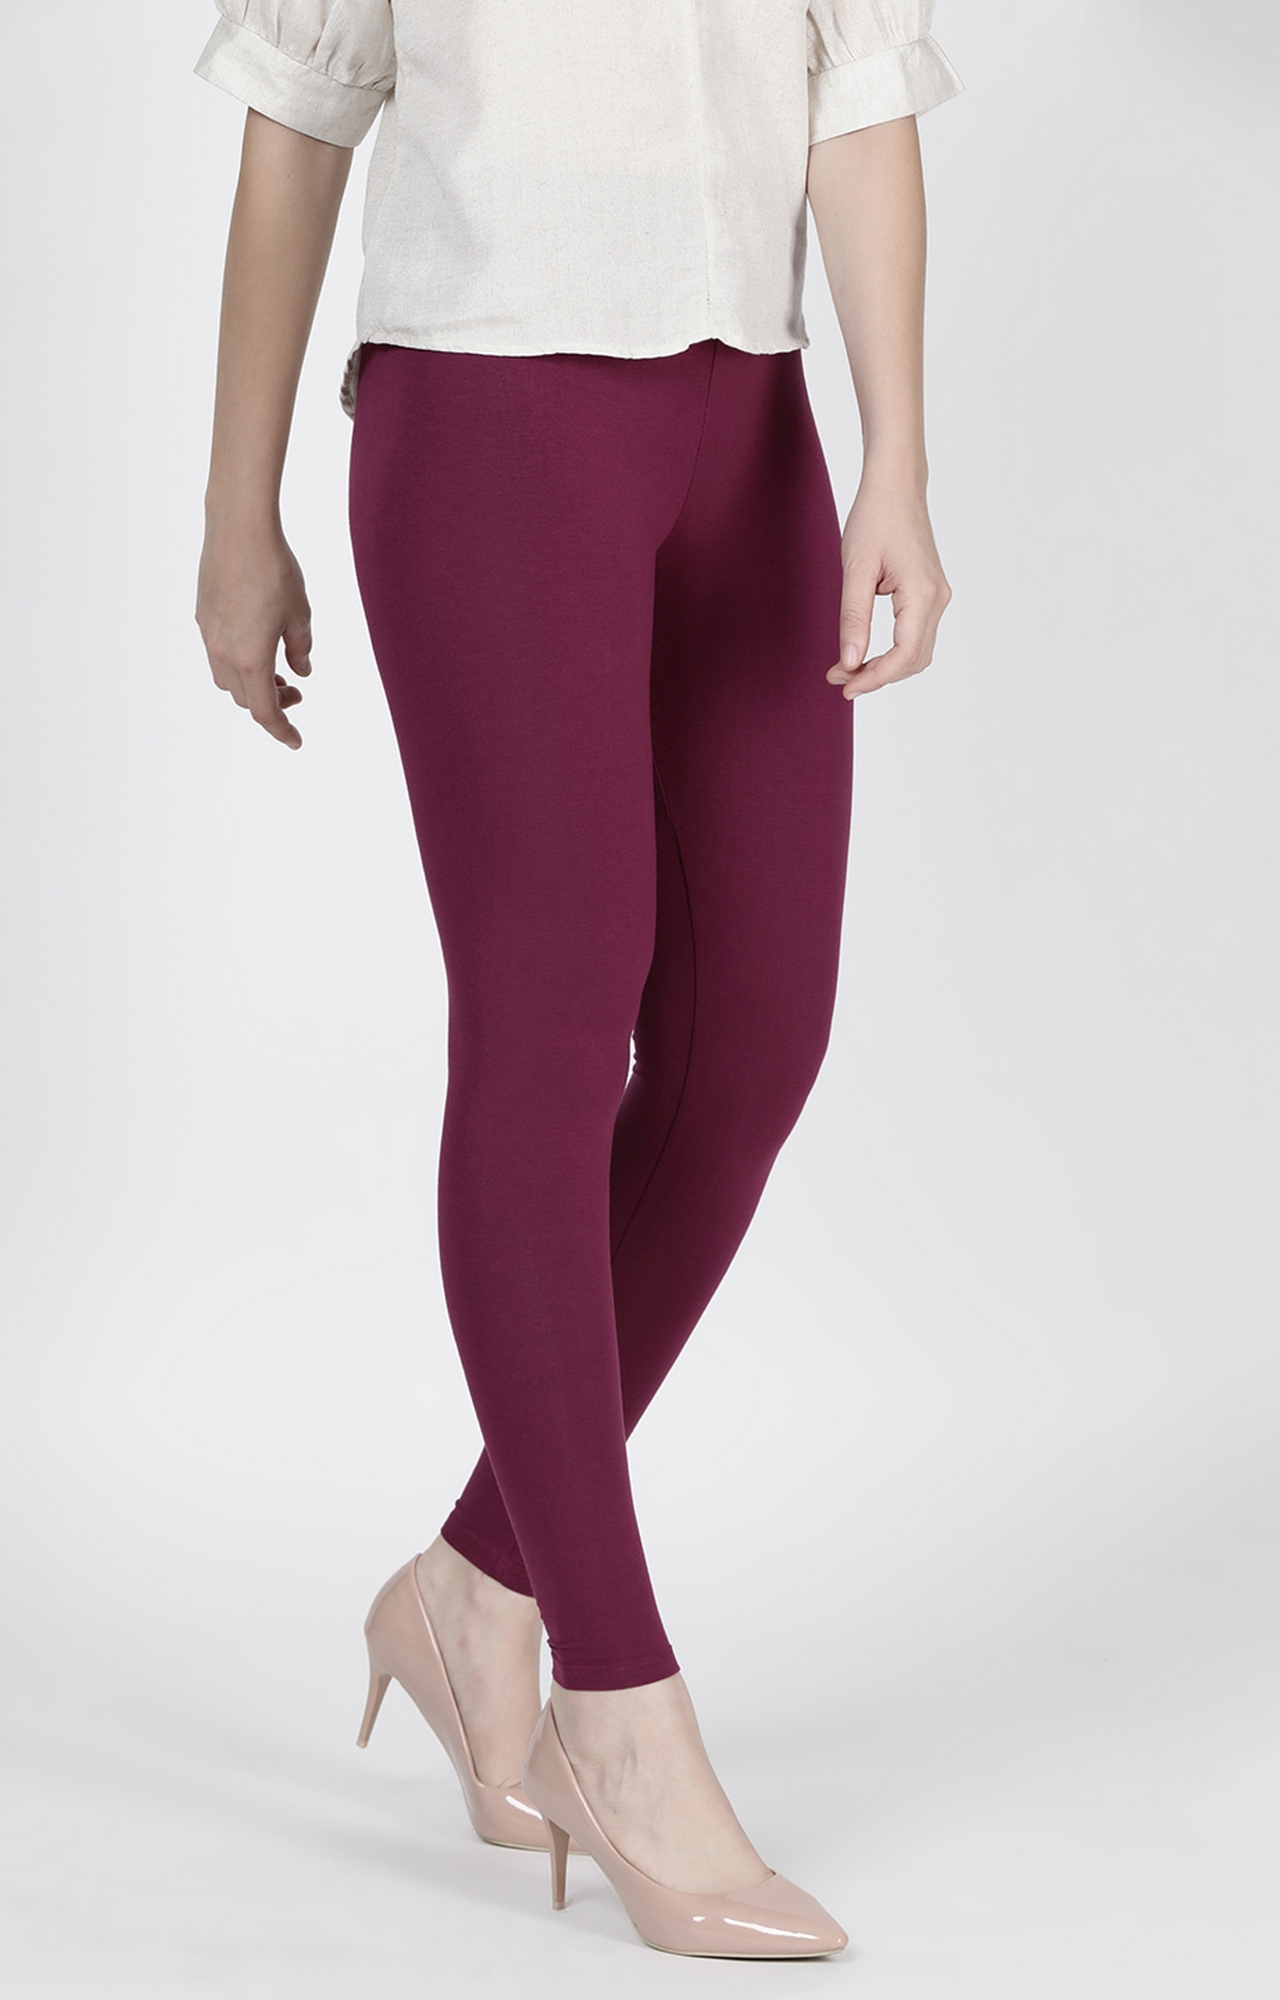 Twinbirds Beet Root Purple Solid Ankle Legging